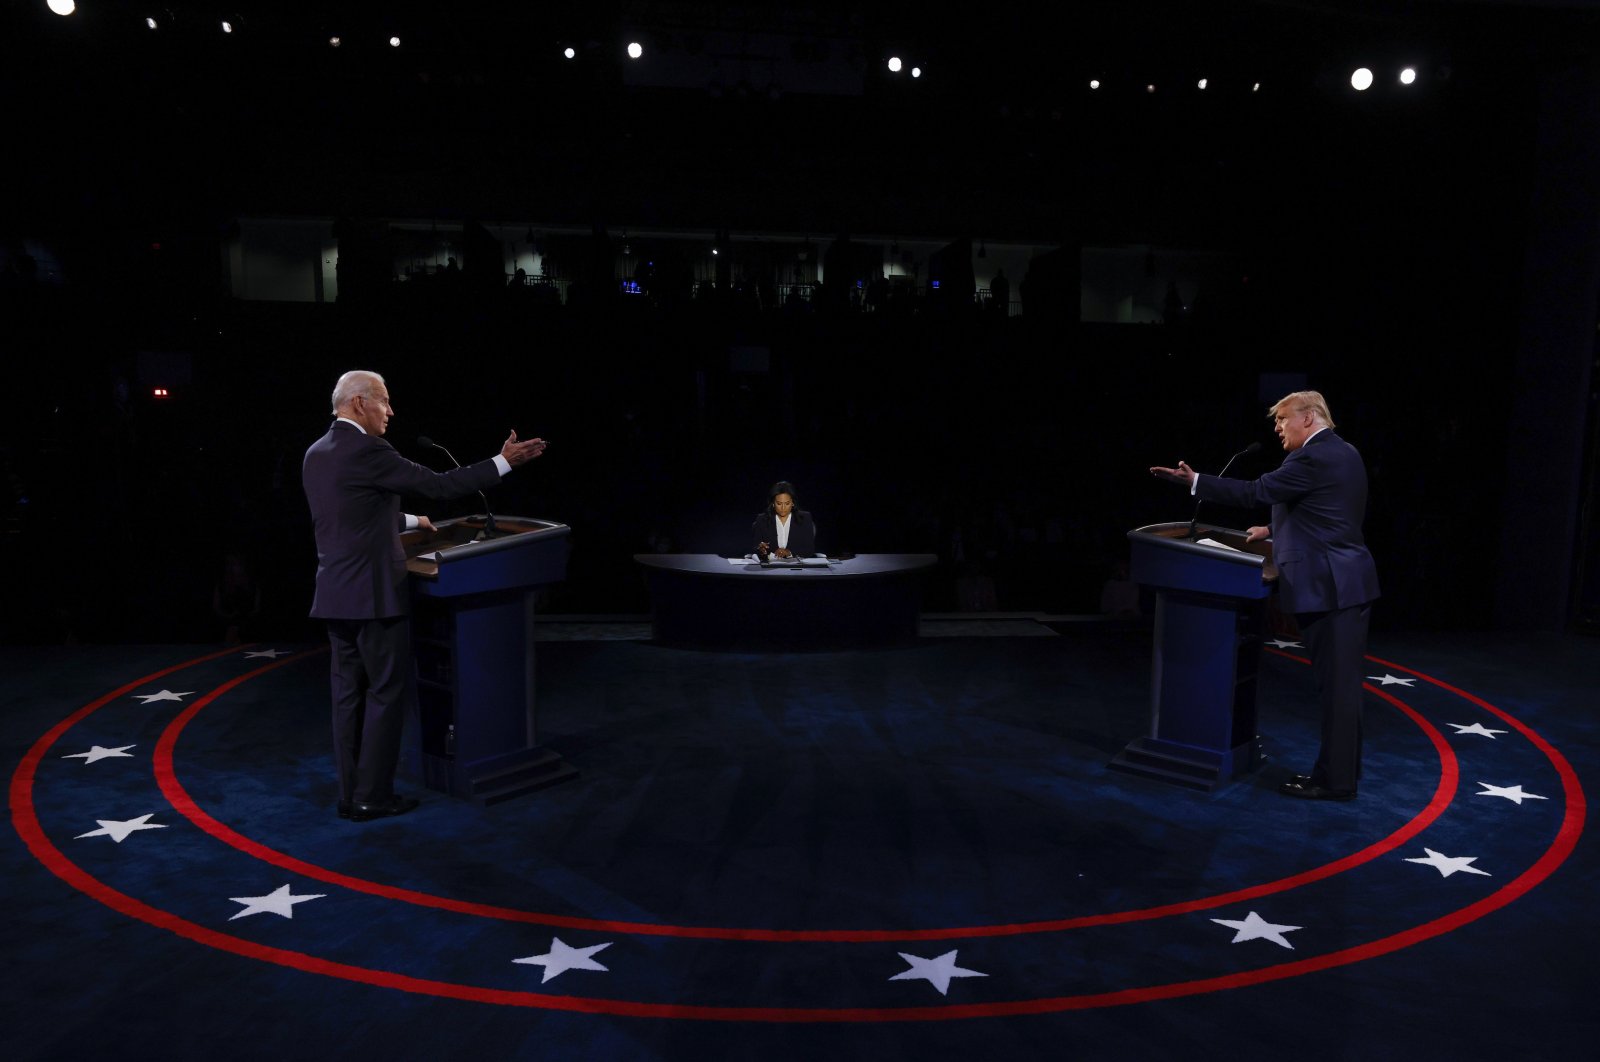 Then U.S. President Donald Trump and Democratic presidential nominee Joe Biden participate in the final presidential debate at Belmont University in Nashville, Tennessee, U.S., Oct. 22, 2020. (Photo by Getty Images)